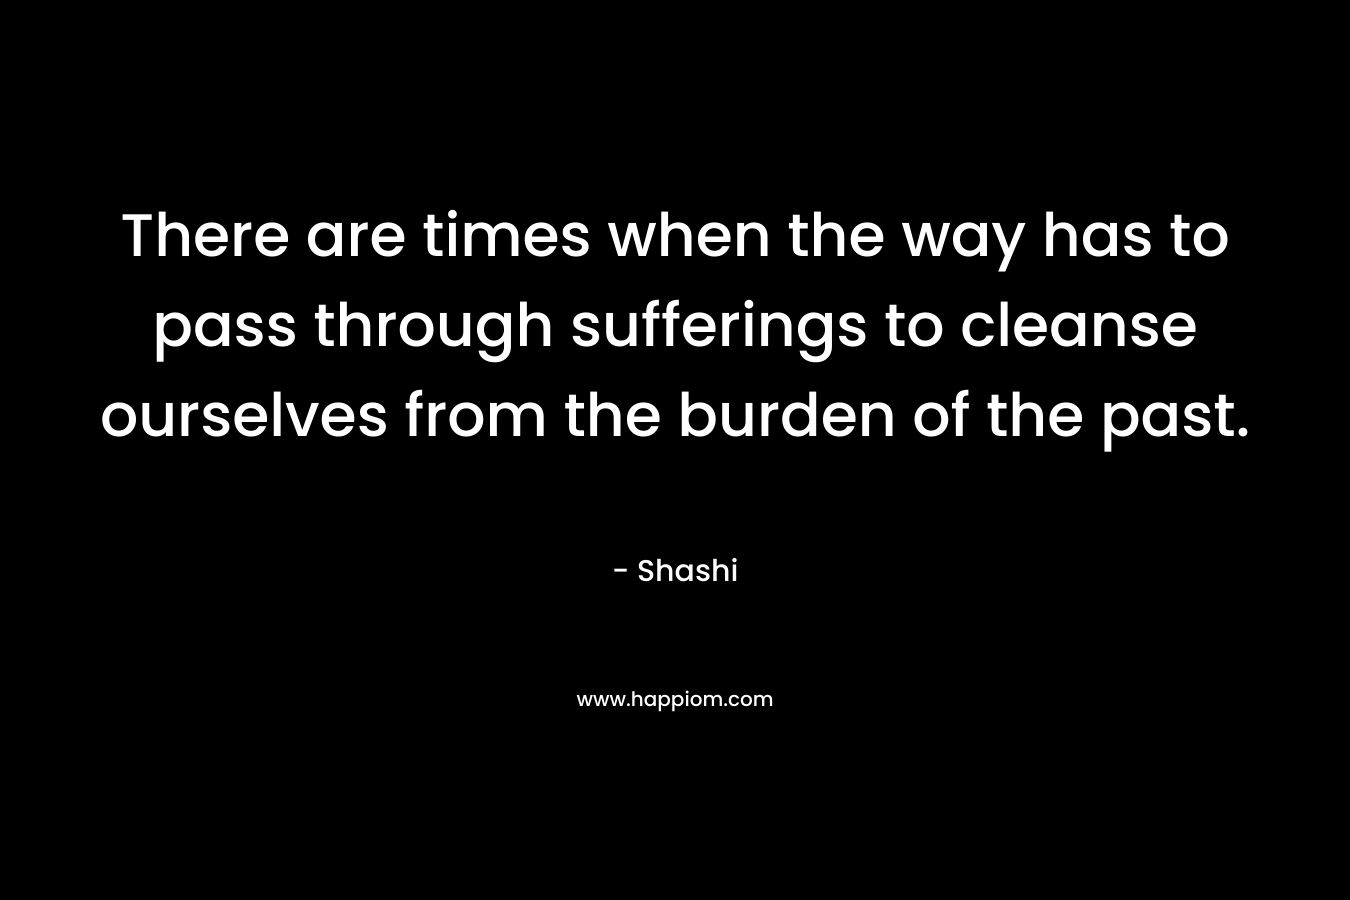 There are times when the way has to pass through sufferings to cleanse ourselves from the burden of the past. – Shashi